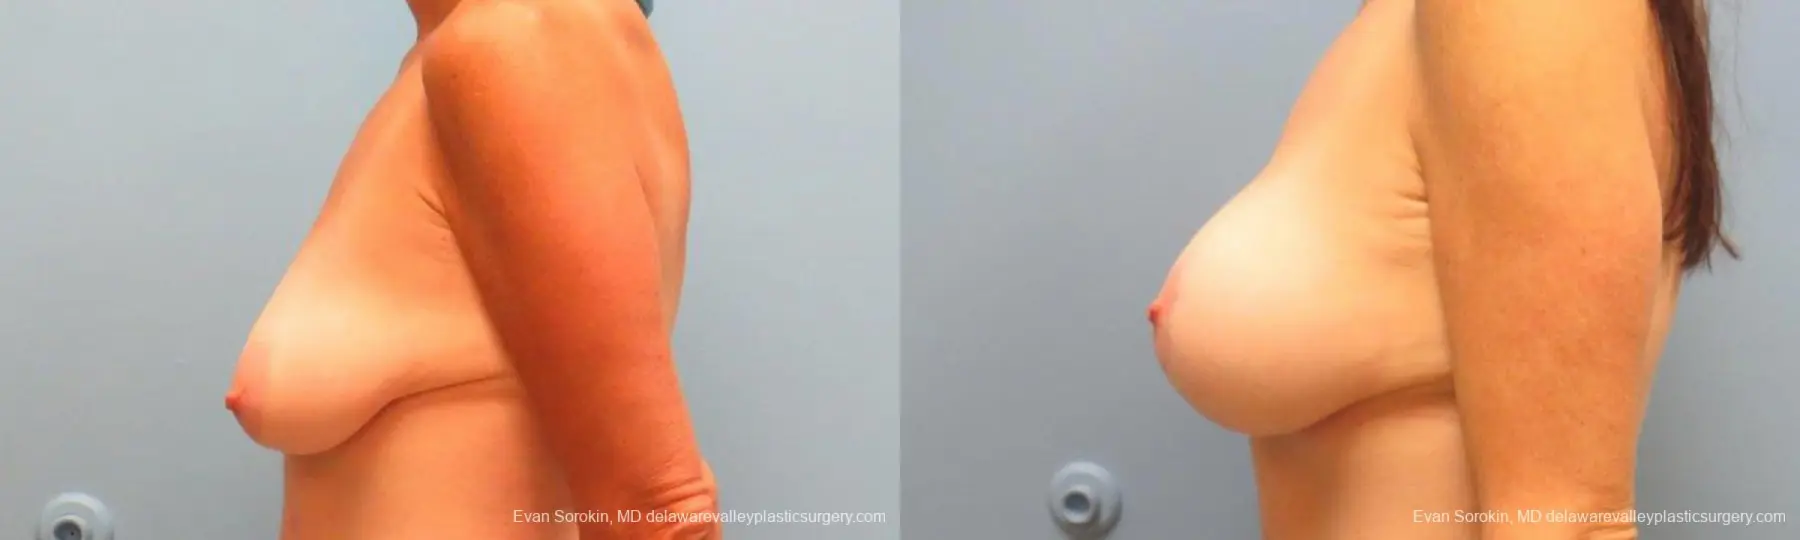 Philadelphia Breast Lift and Augmentation 9486 - Before and After 5